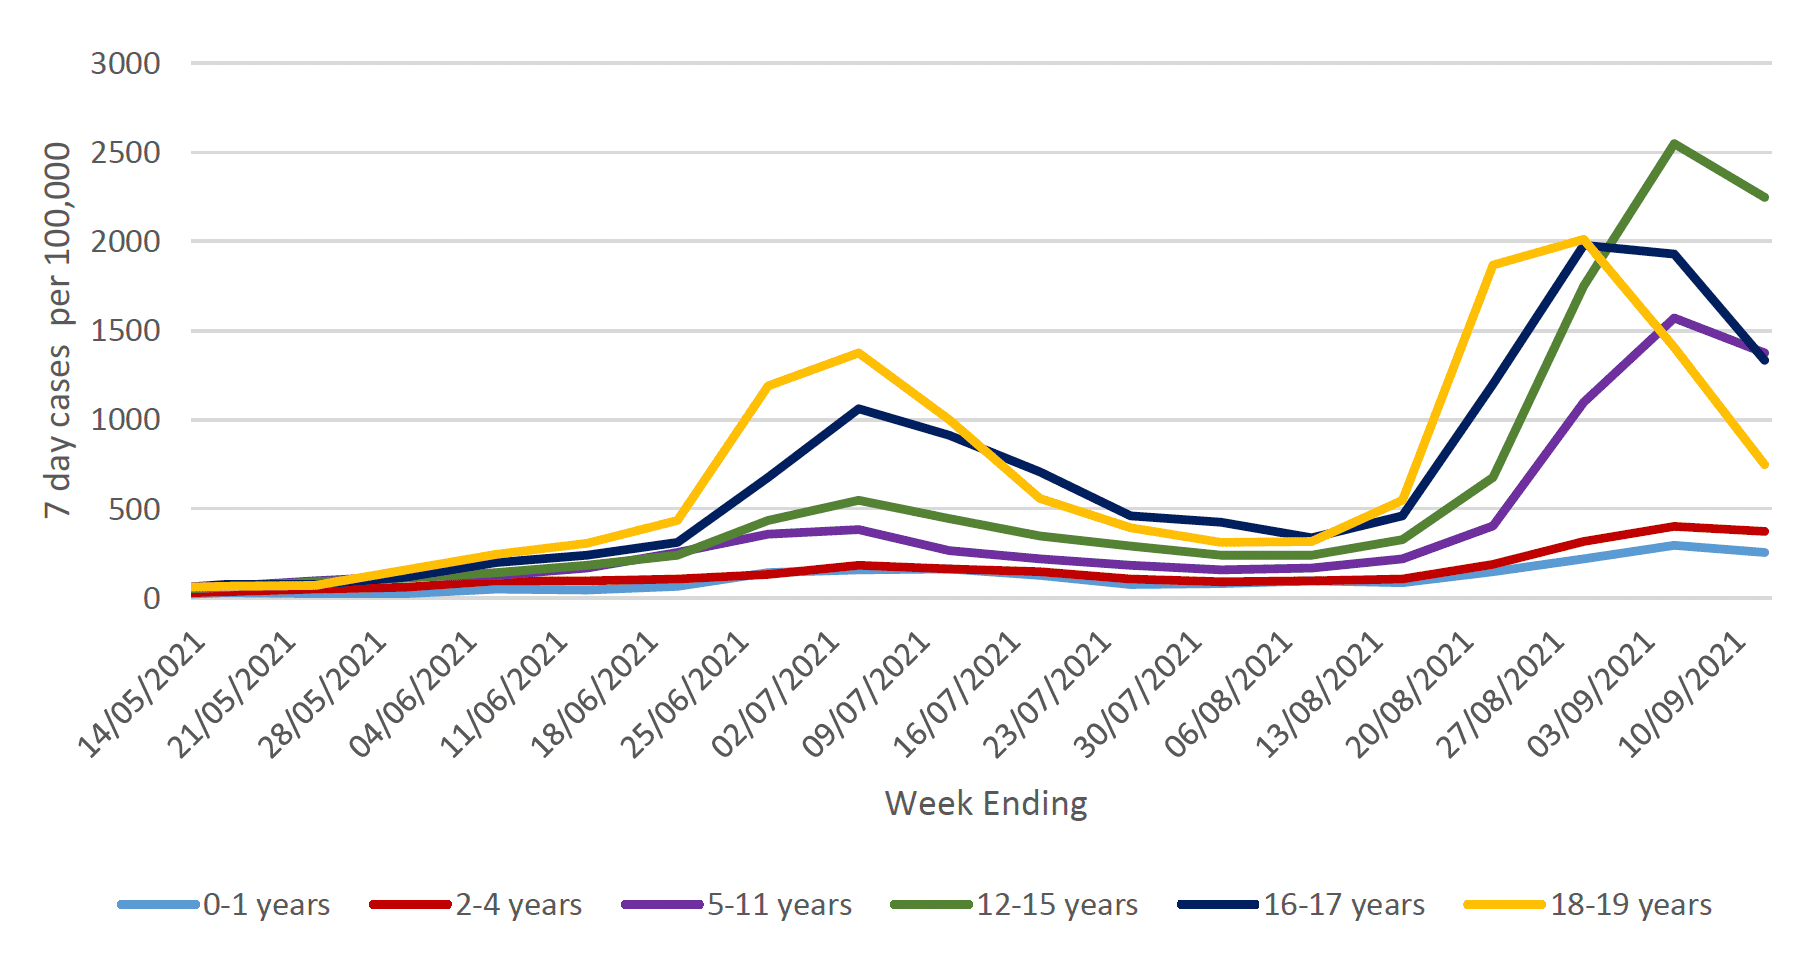 This figure shows the 7-day case rate of school pupils who tested positive for Covid-19, grouped in six age groups, during the period 14 February 2021 to 5 September 2021. The rates for all age groups have varied over time with an increase in rates for the 18-19 age group in the middle of February. The rates decreased for age groups at the end of March and then levelled off during April. They then started to increase in May and peaked in early July, with the highest case rate among 18-19 year olds. The rates decreased across all age groups in late July. Case rates then started to rise at the beginning of August 2021. In the latest week ending 12 September, the 7 day case rates declined in all age groups. 